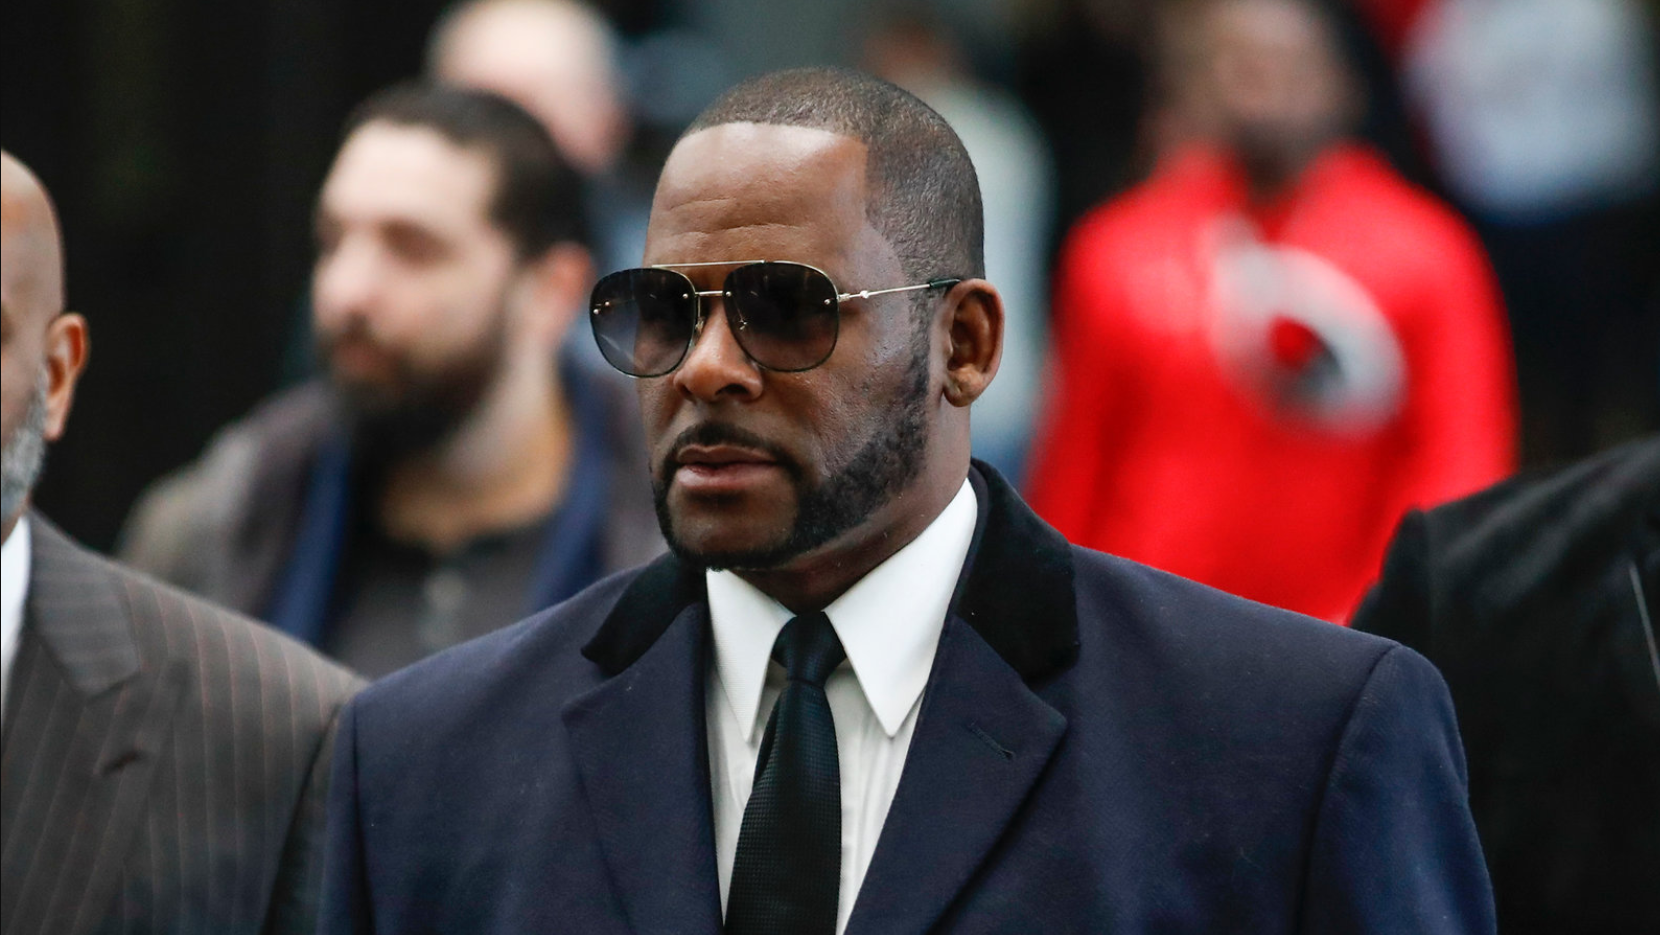 R. Kelly, the top-selling R&B star who dodged sex allegations for years